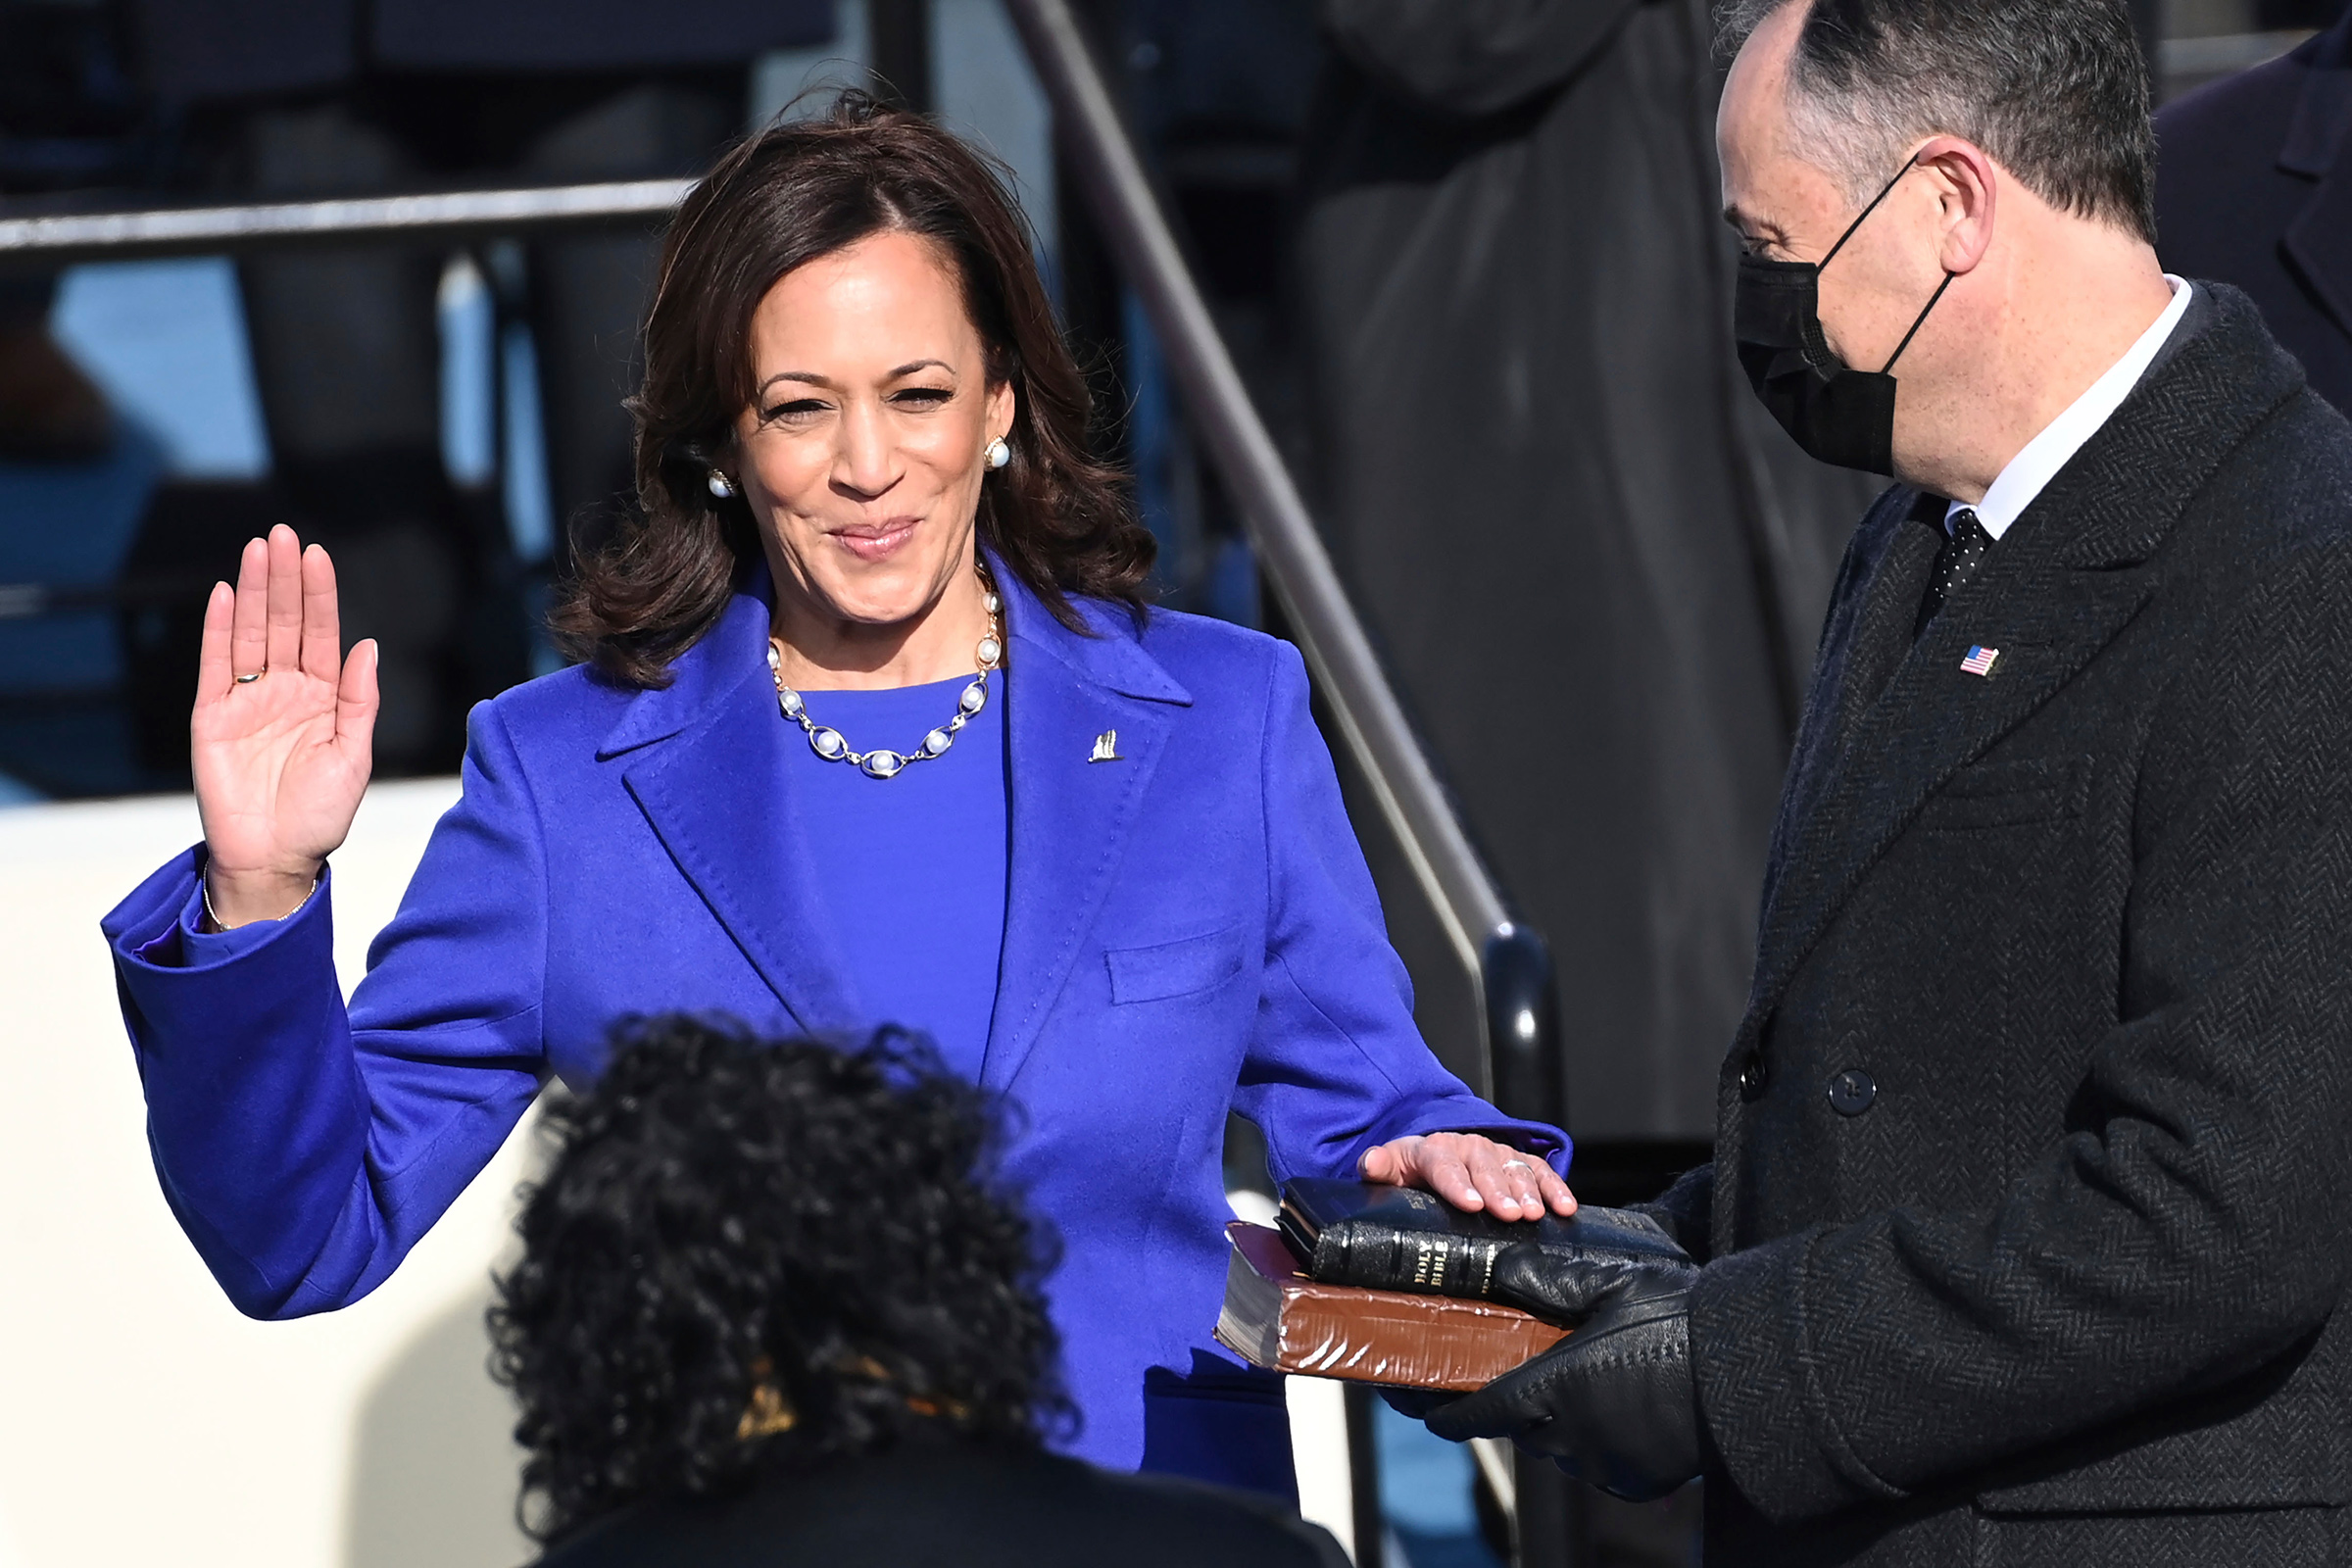 Kamala Harris is sworn in as vice president by Supreme Court Justice Sonia Sotomayor as her husband Doug Emhoff holds the Bible.